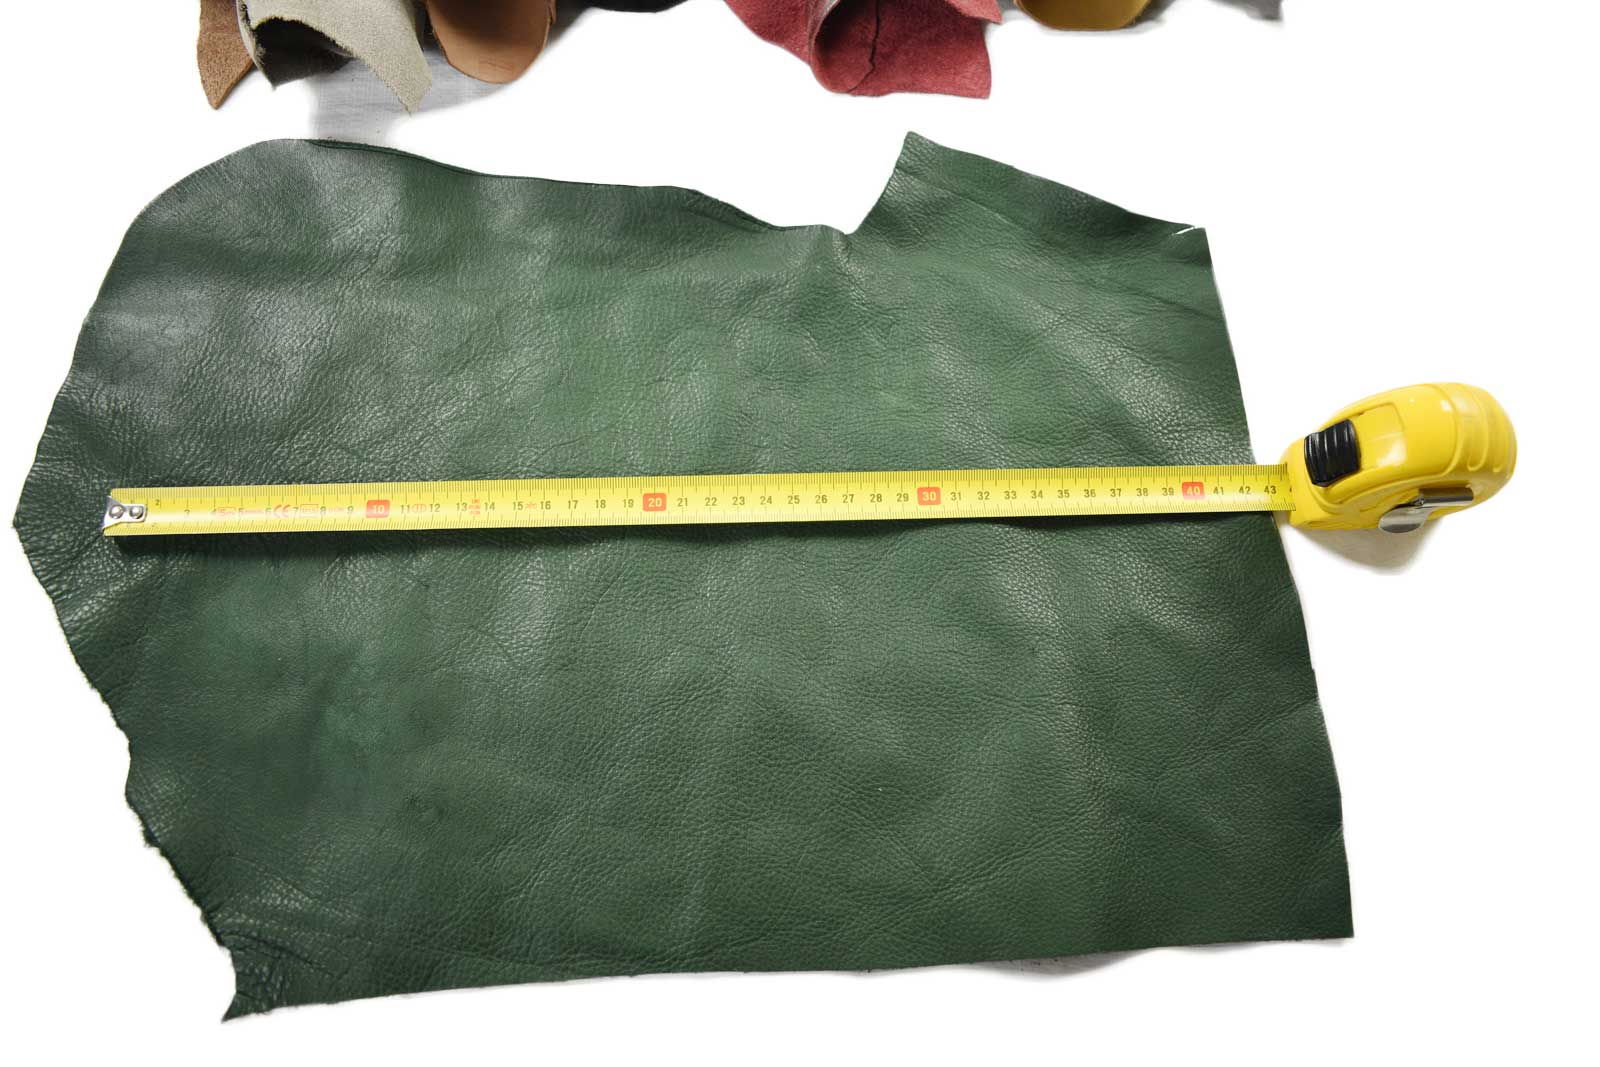 Size of green leather piece